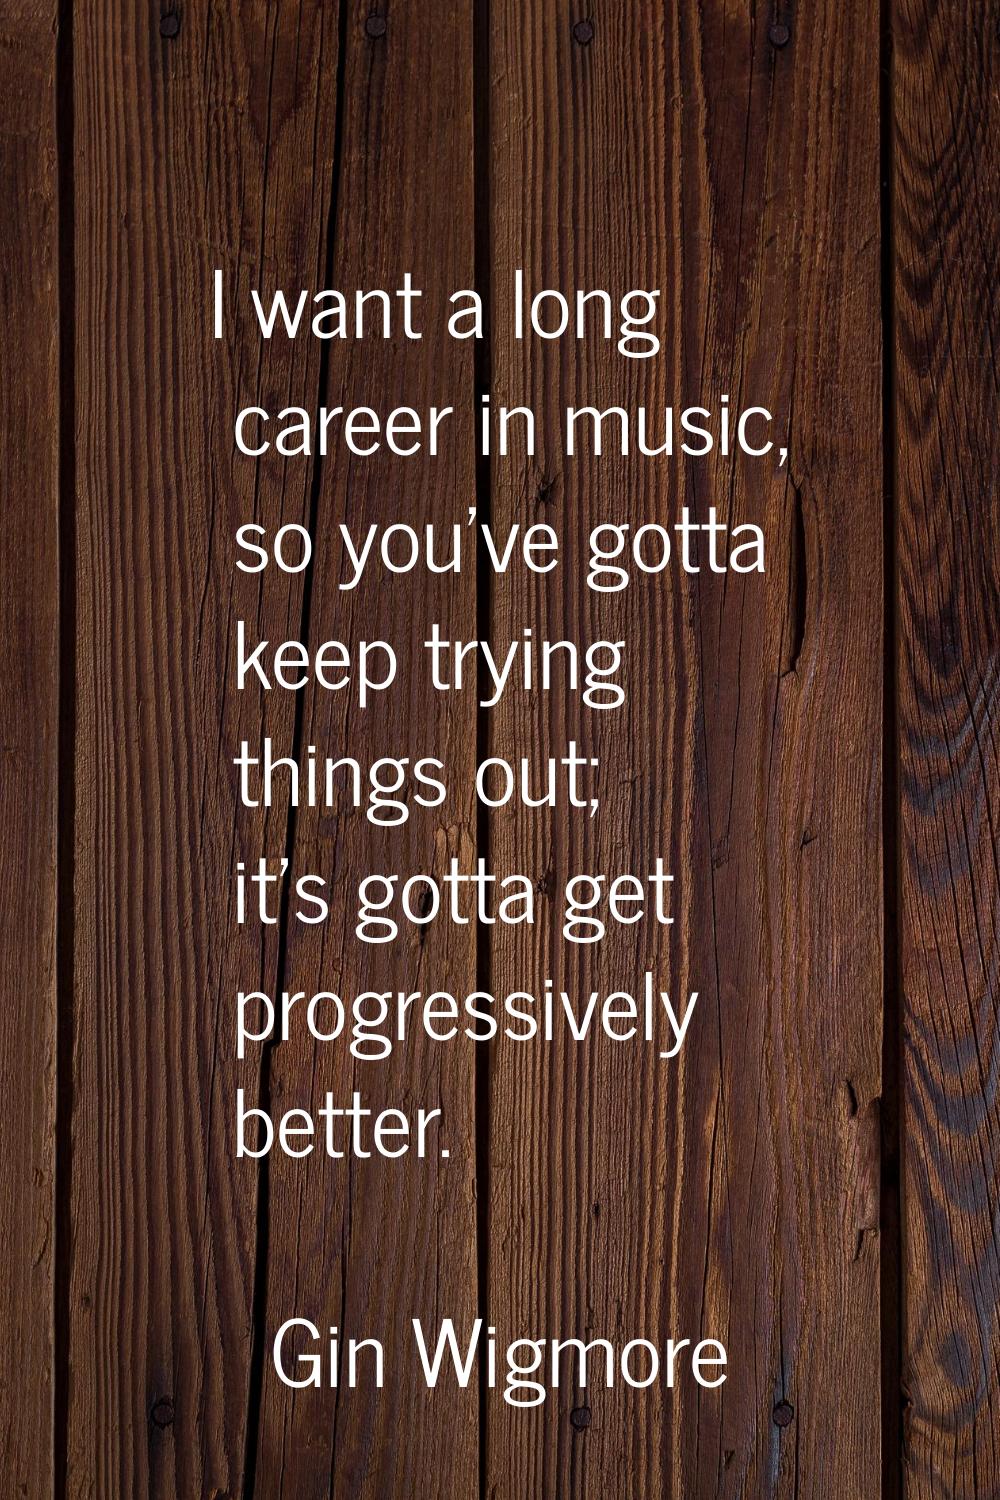 I want a long career in music, so you've gotta keep trying things out; it's gotta get progressively